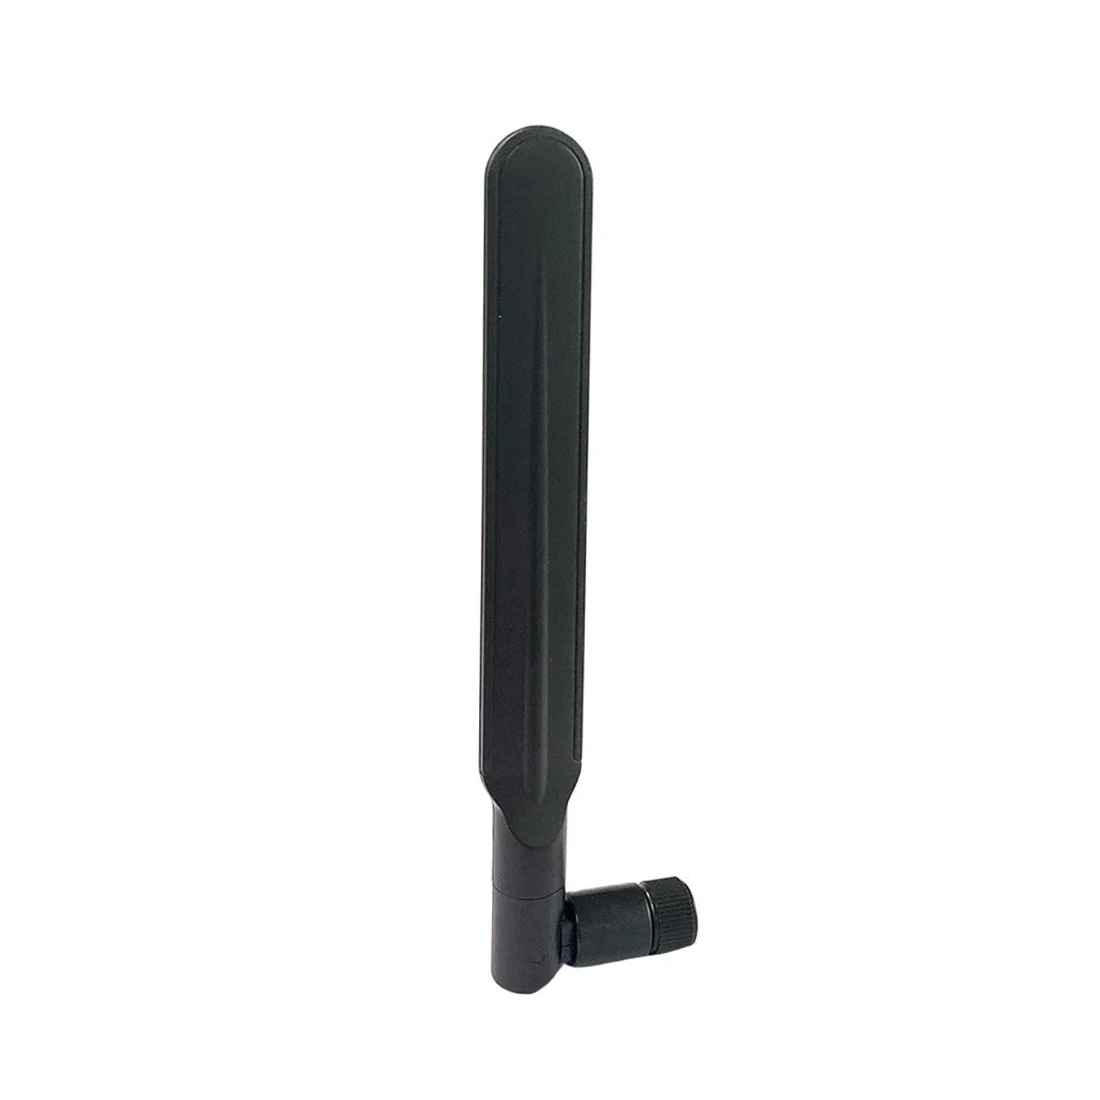 

1pc Wifi Antenna 2.4Ghz /5Ghz Dual Band Aerial 8dbi High Gain Omni SMA Connector Oars Flat New for Wireless Modem